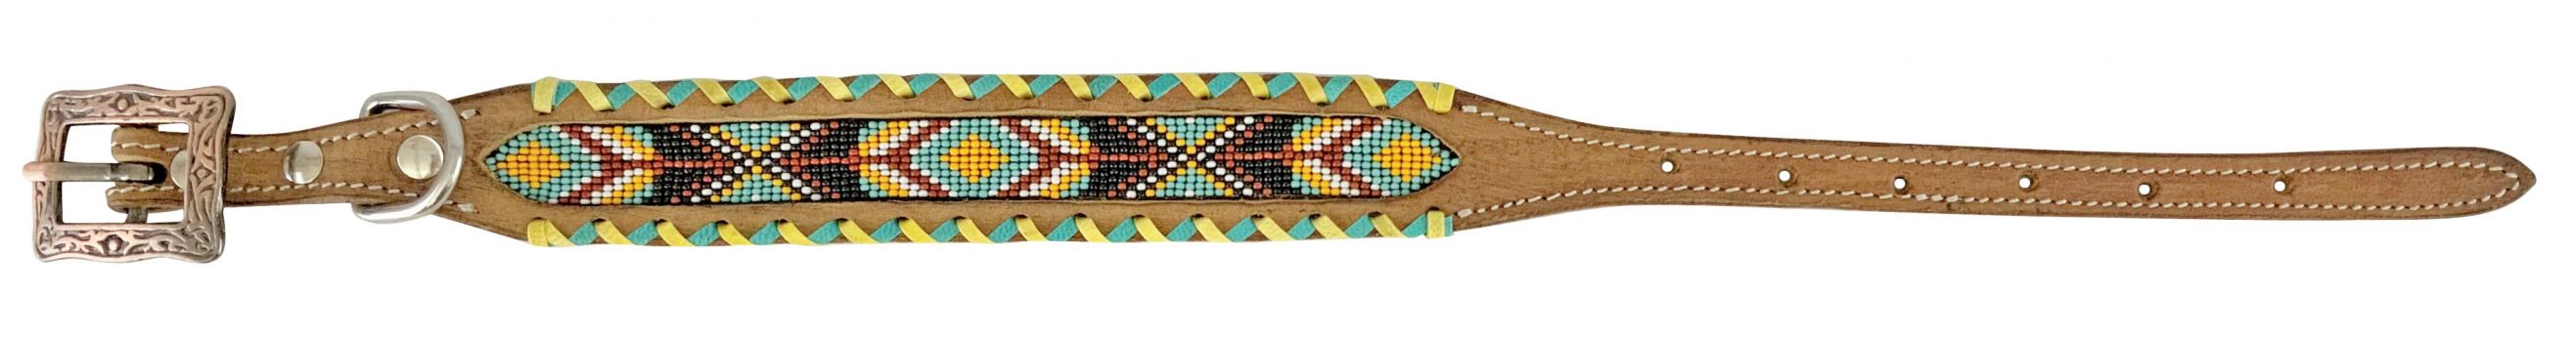 Showman Couture Genuine leather dog collar with beaded inlay - teal and yellow whipstitching